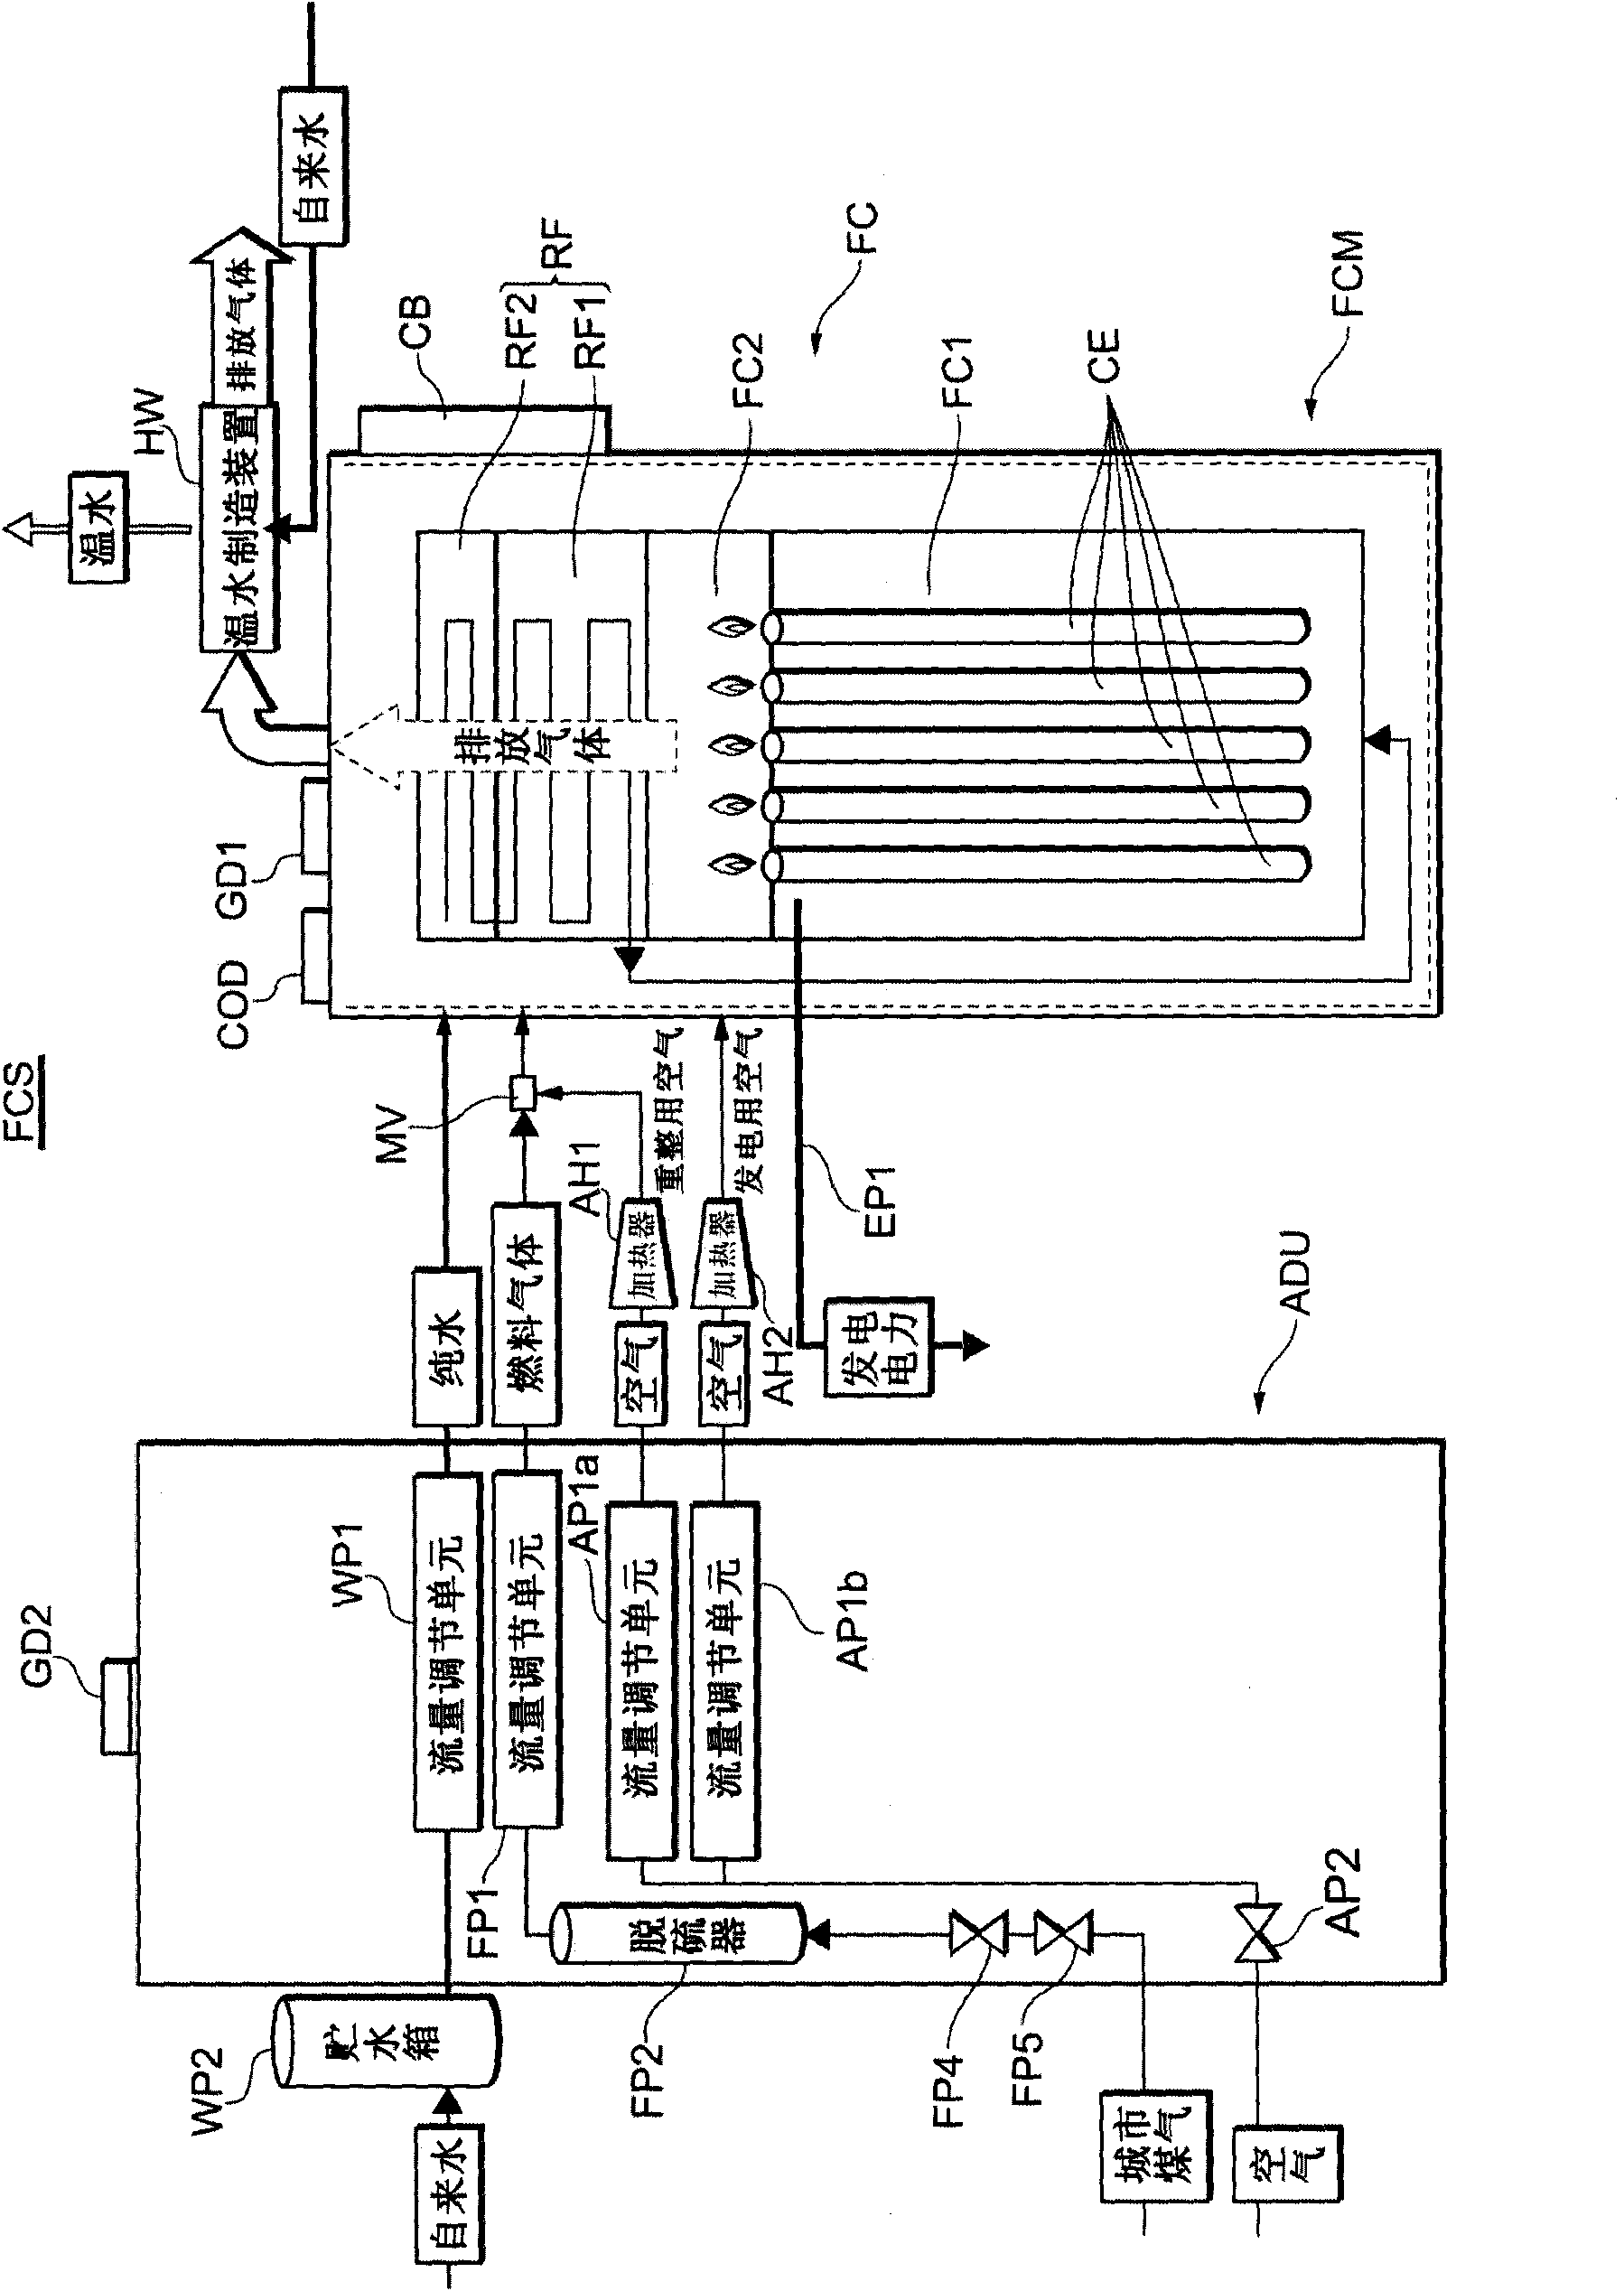 Fuel battery system